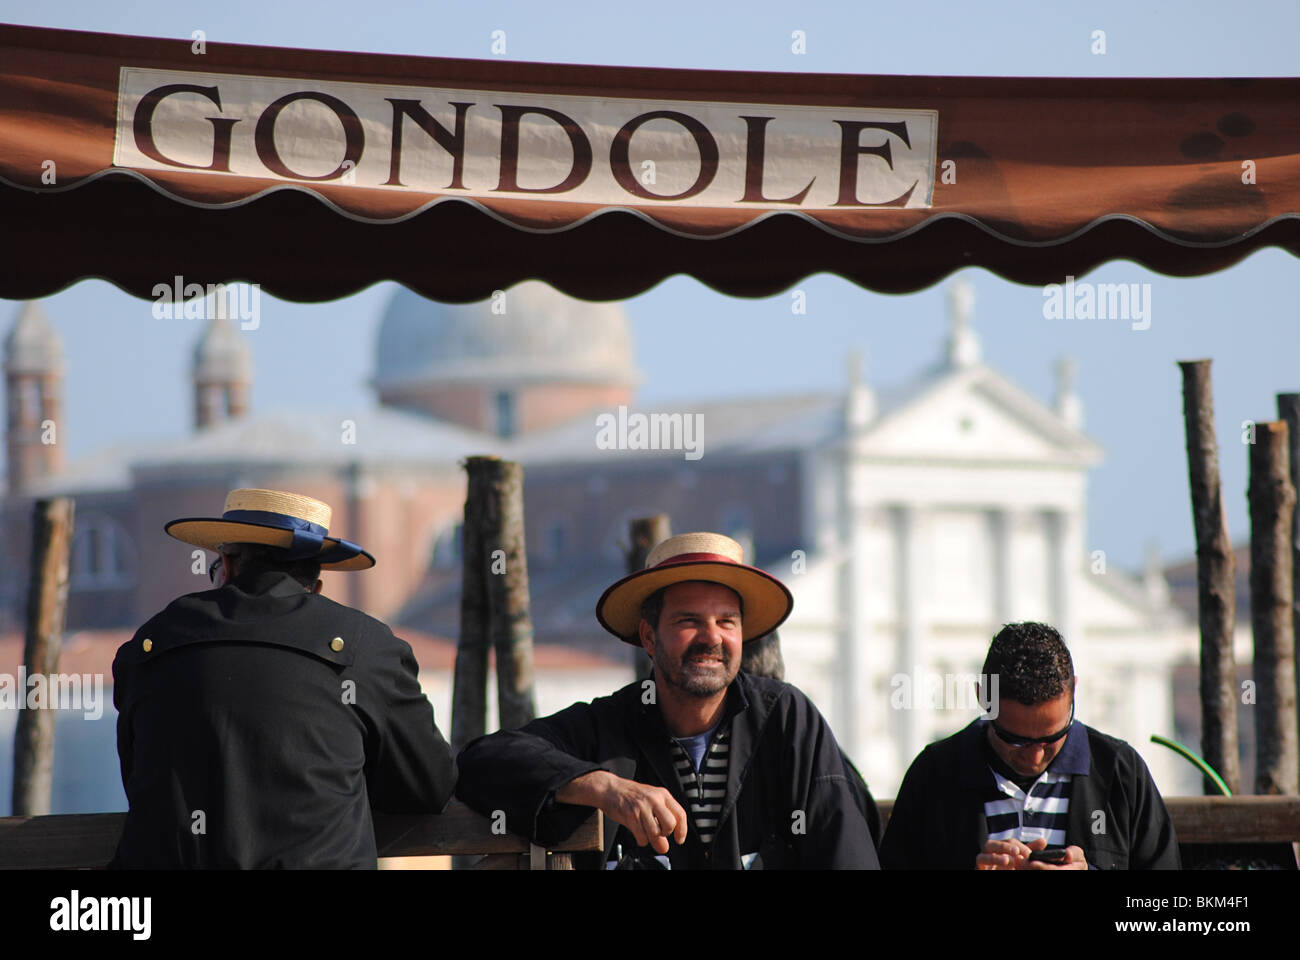 Gondoliers wait for business Venice, Italy Stock Photo